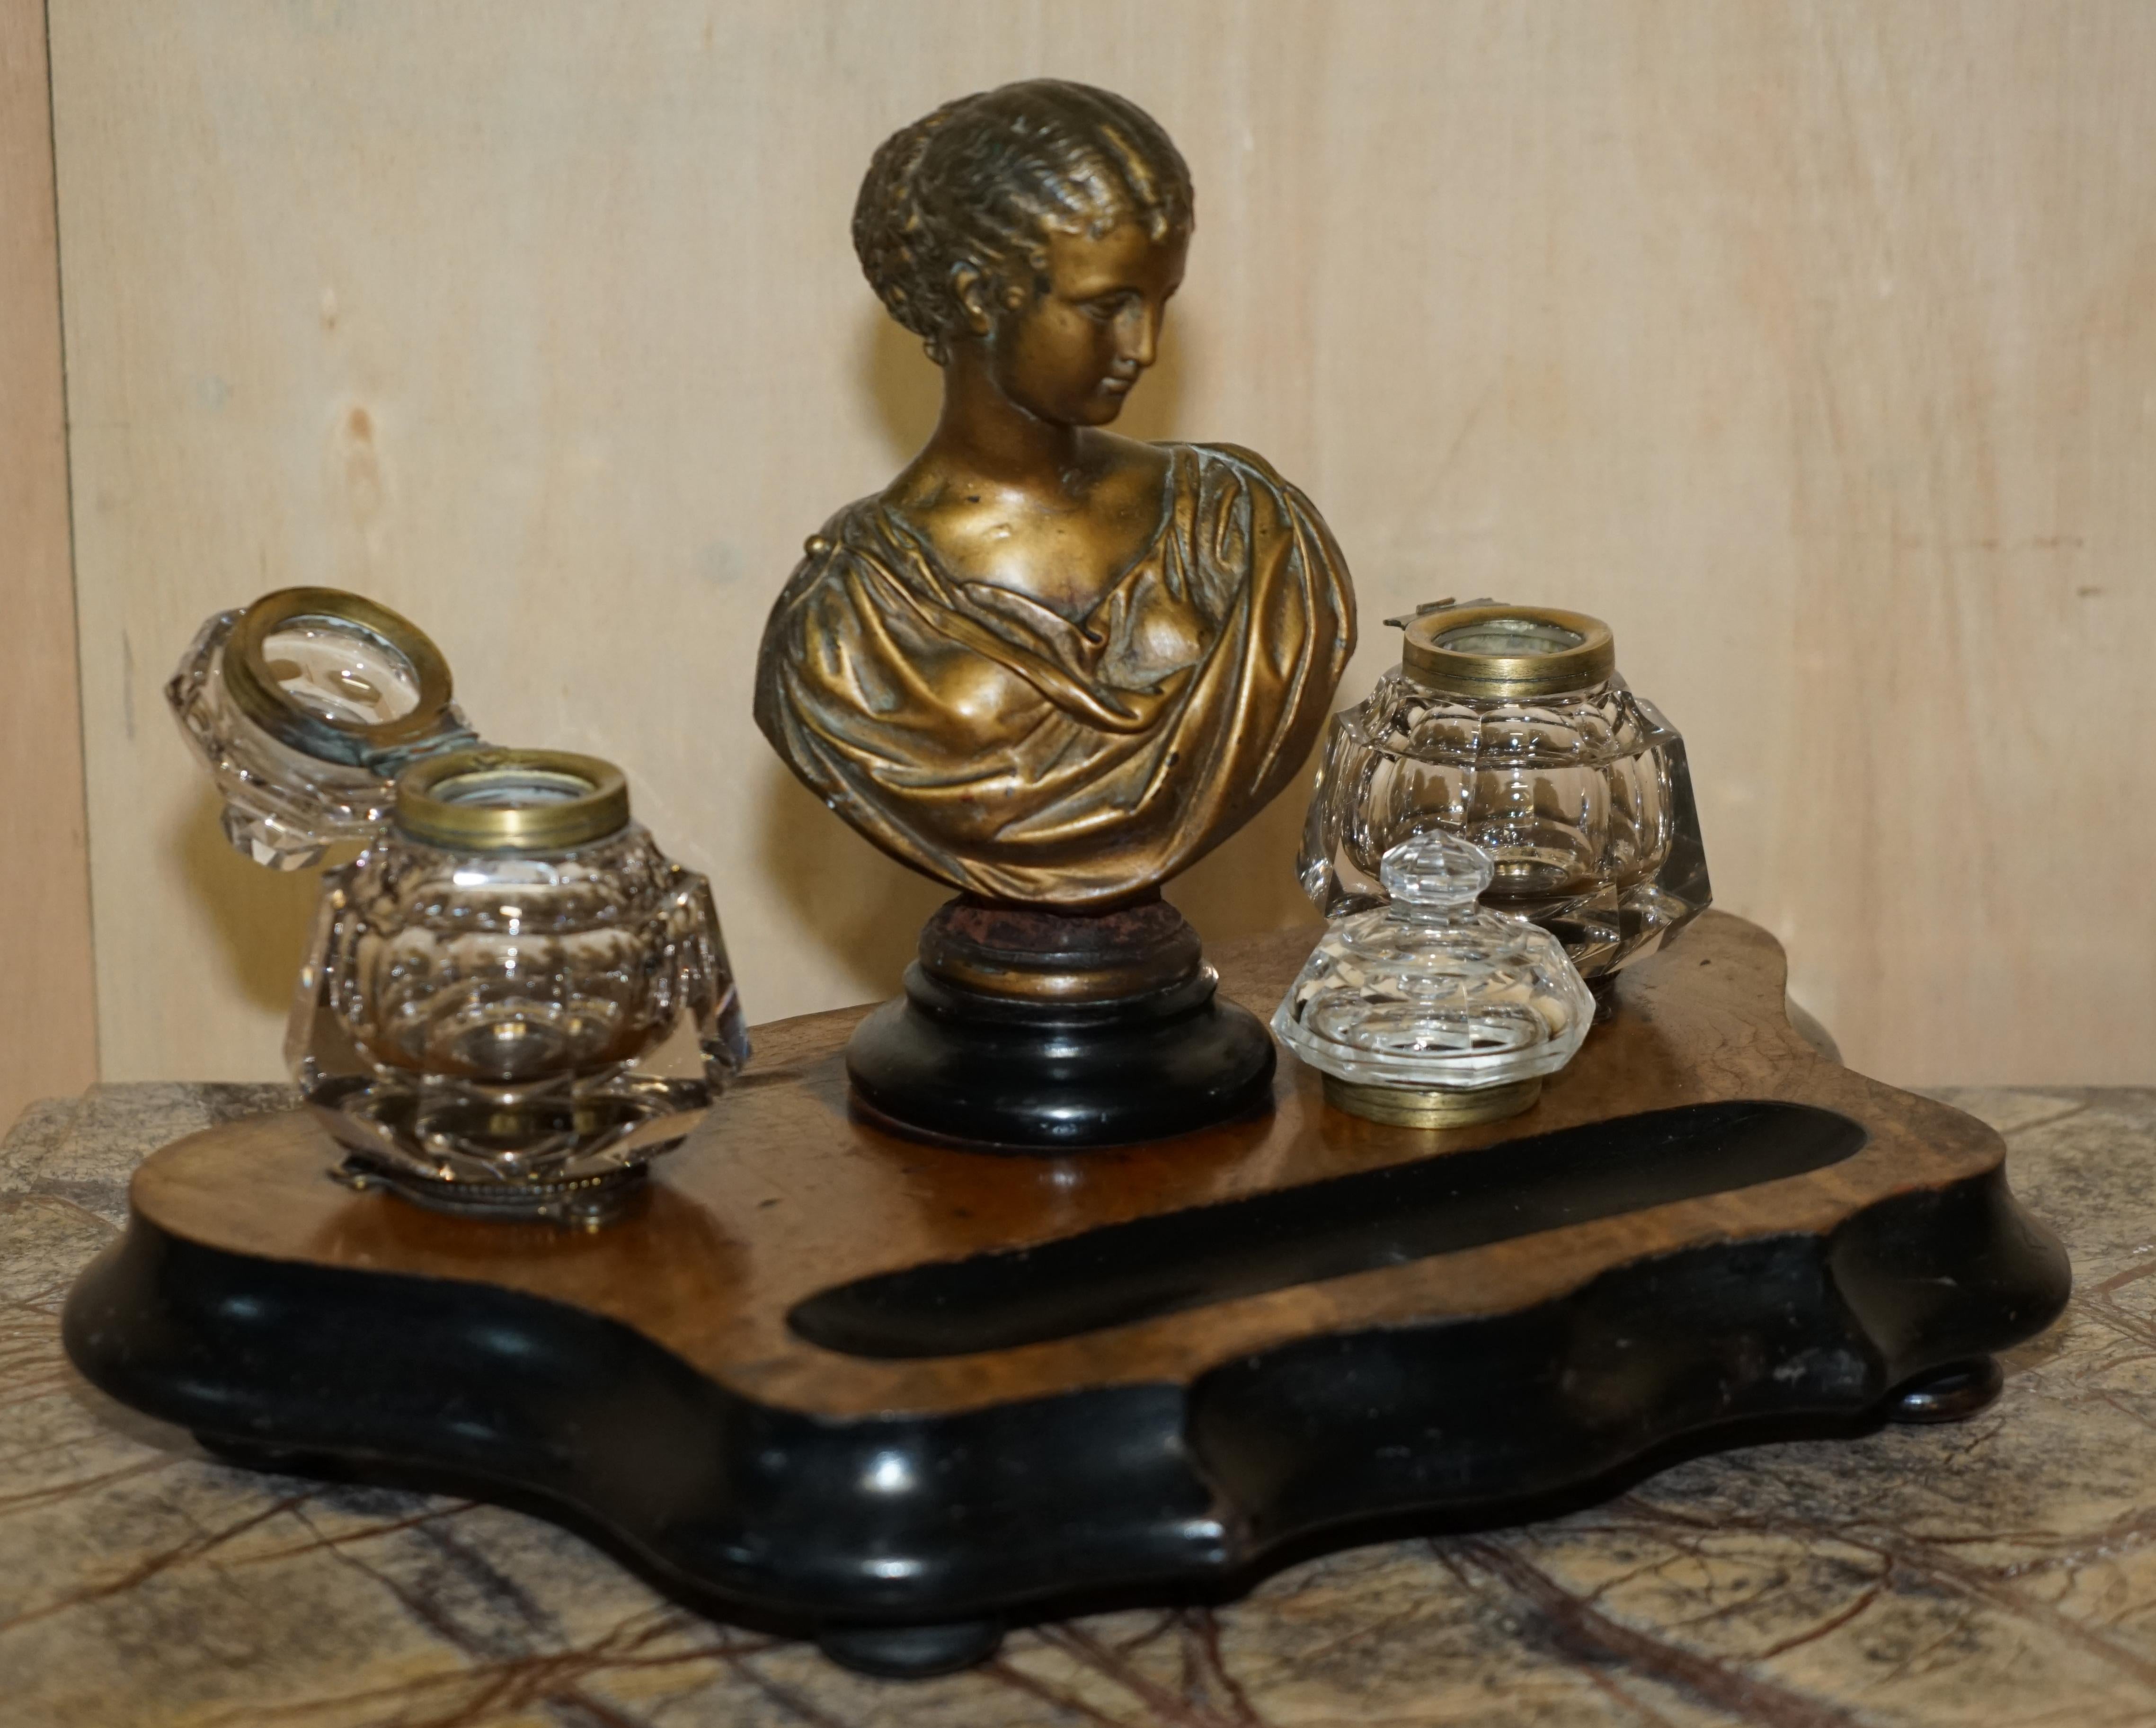 Stunning Antique French Bronze Statue on Inkwell Stand, circa 1880 For Sale 7